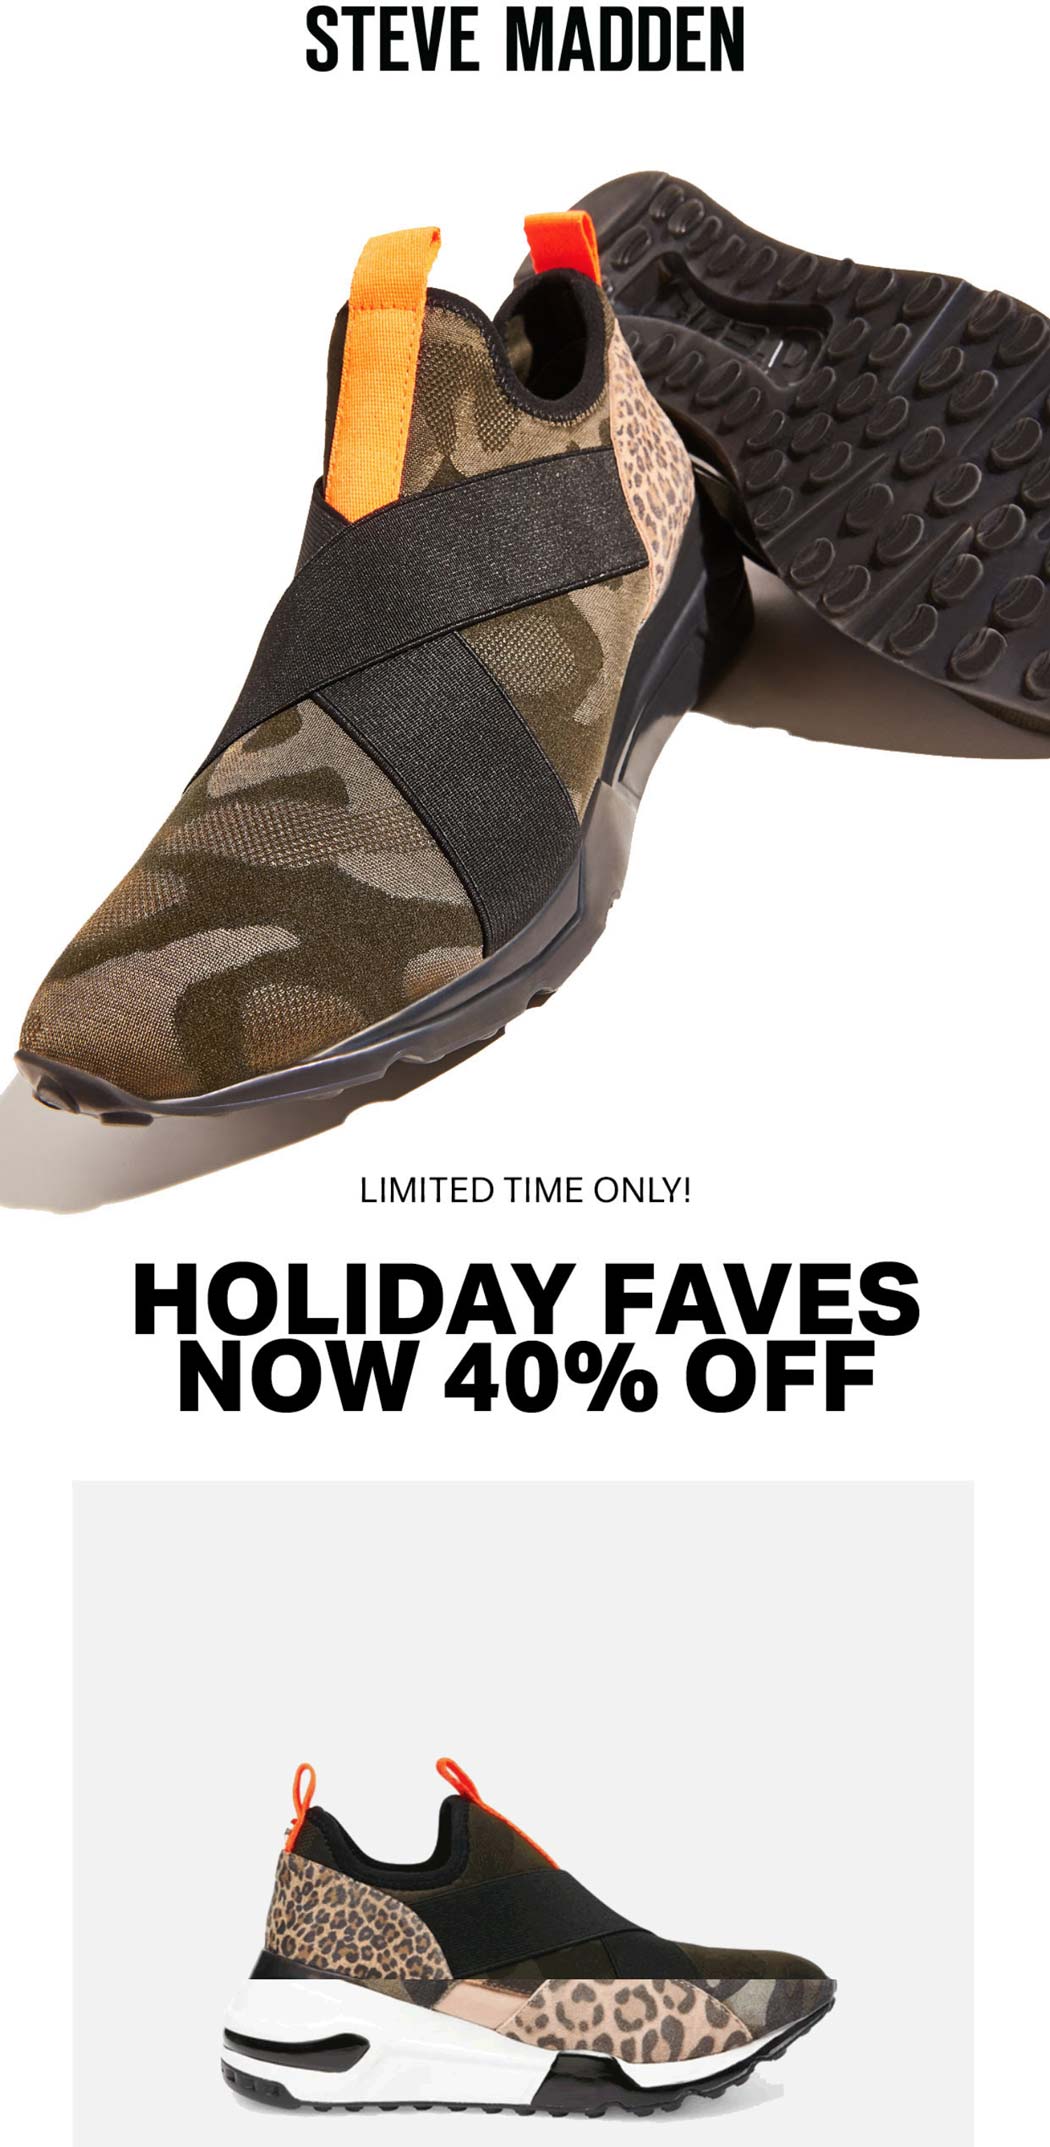 Steve Madden stores Coupon  40% off holiday favorite shoes & boots at Steve Madden #stevemadden 